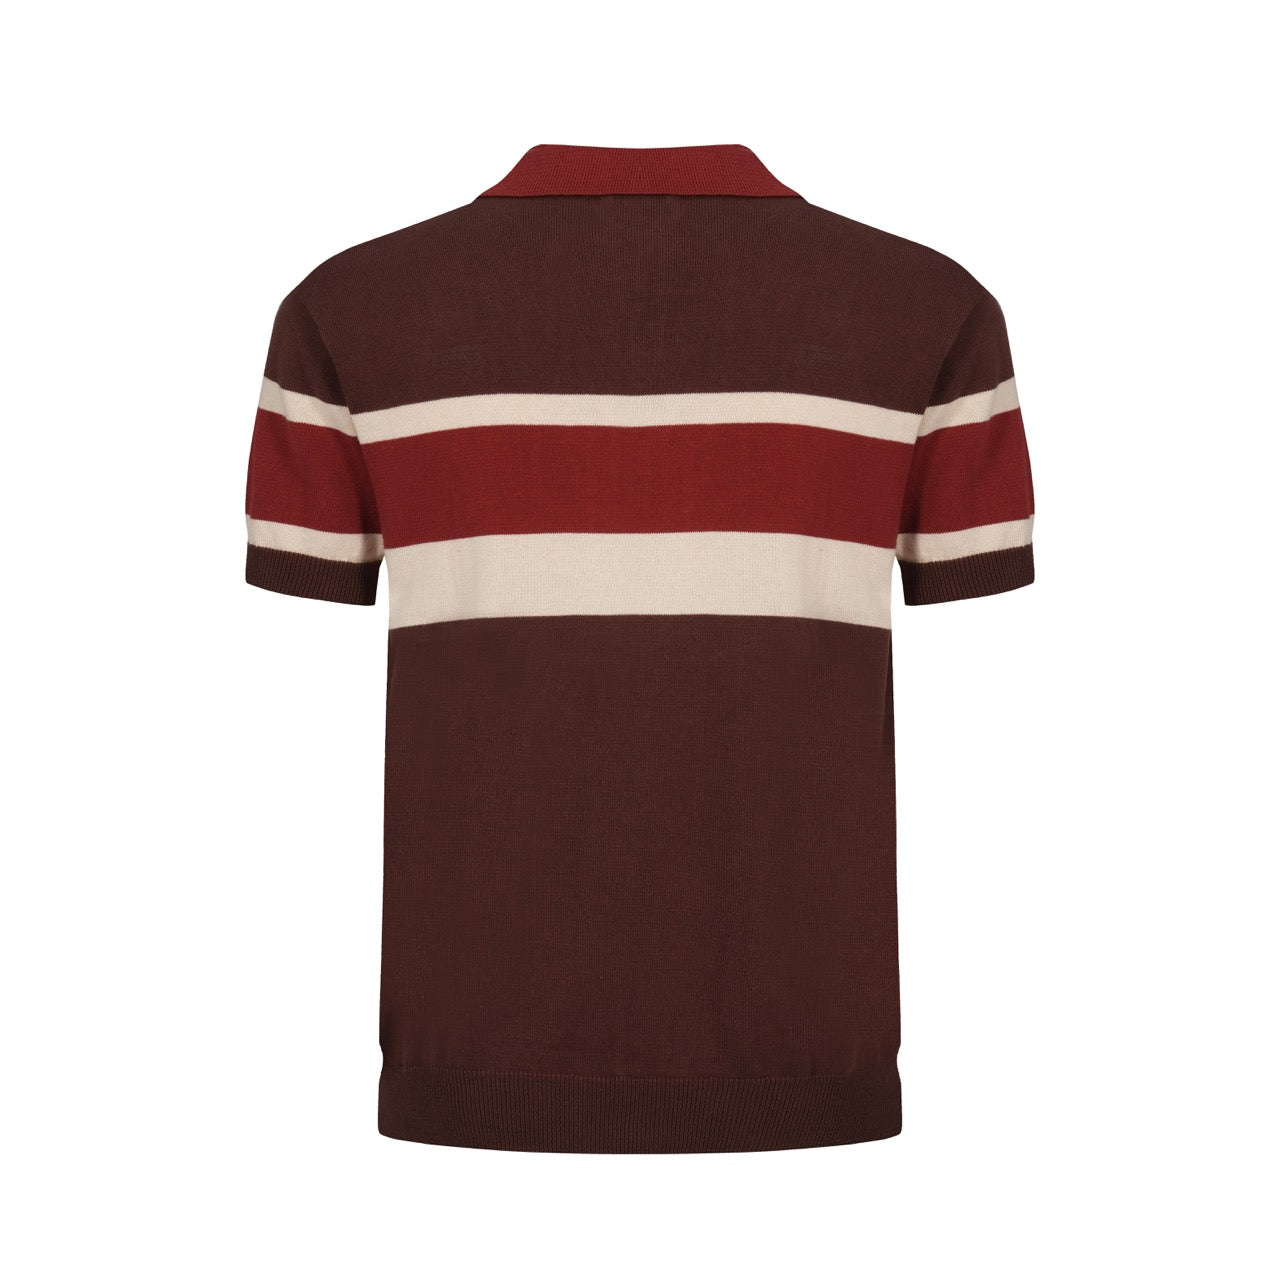 OXKNIT Men Vintage Clothing 1960s Mod Style Casual Red Brown Line Knitted Retro Wear